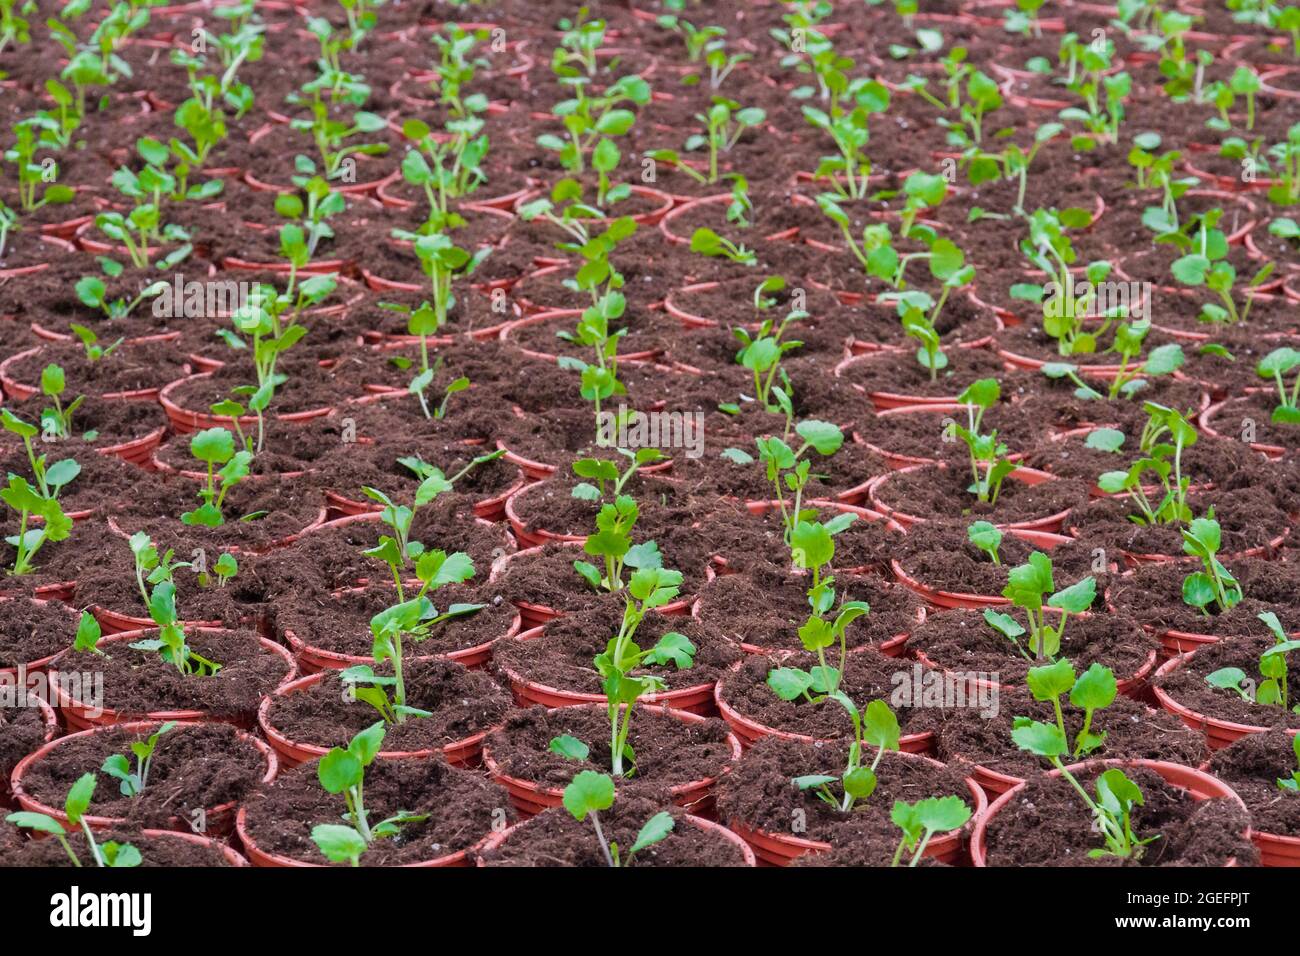 Greenhouse facilities. Growing flowers in the greenhouse farm. Stock Photo